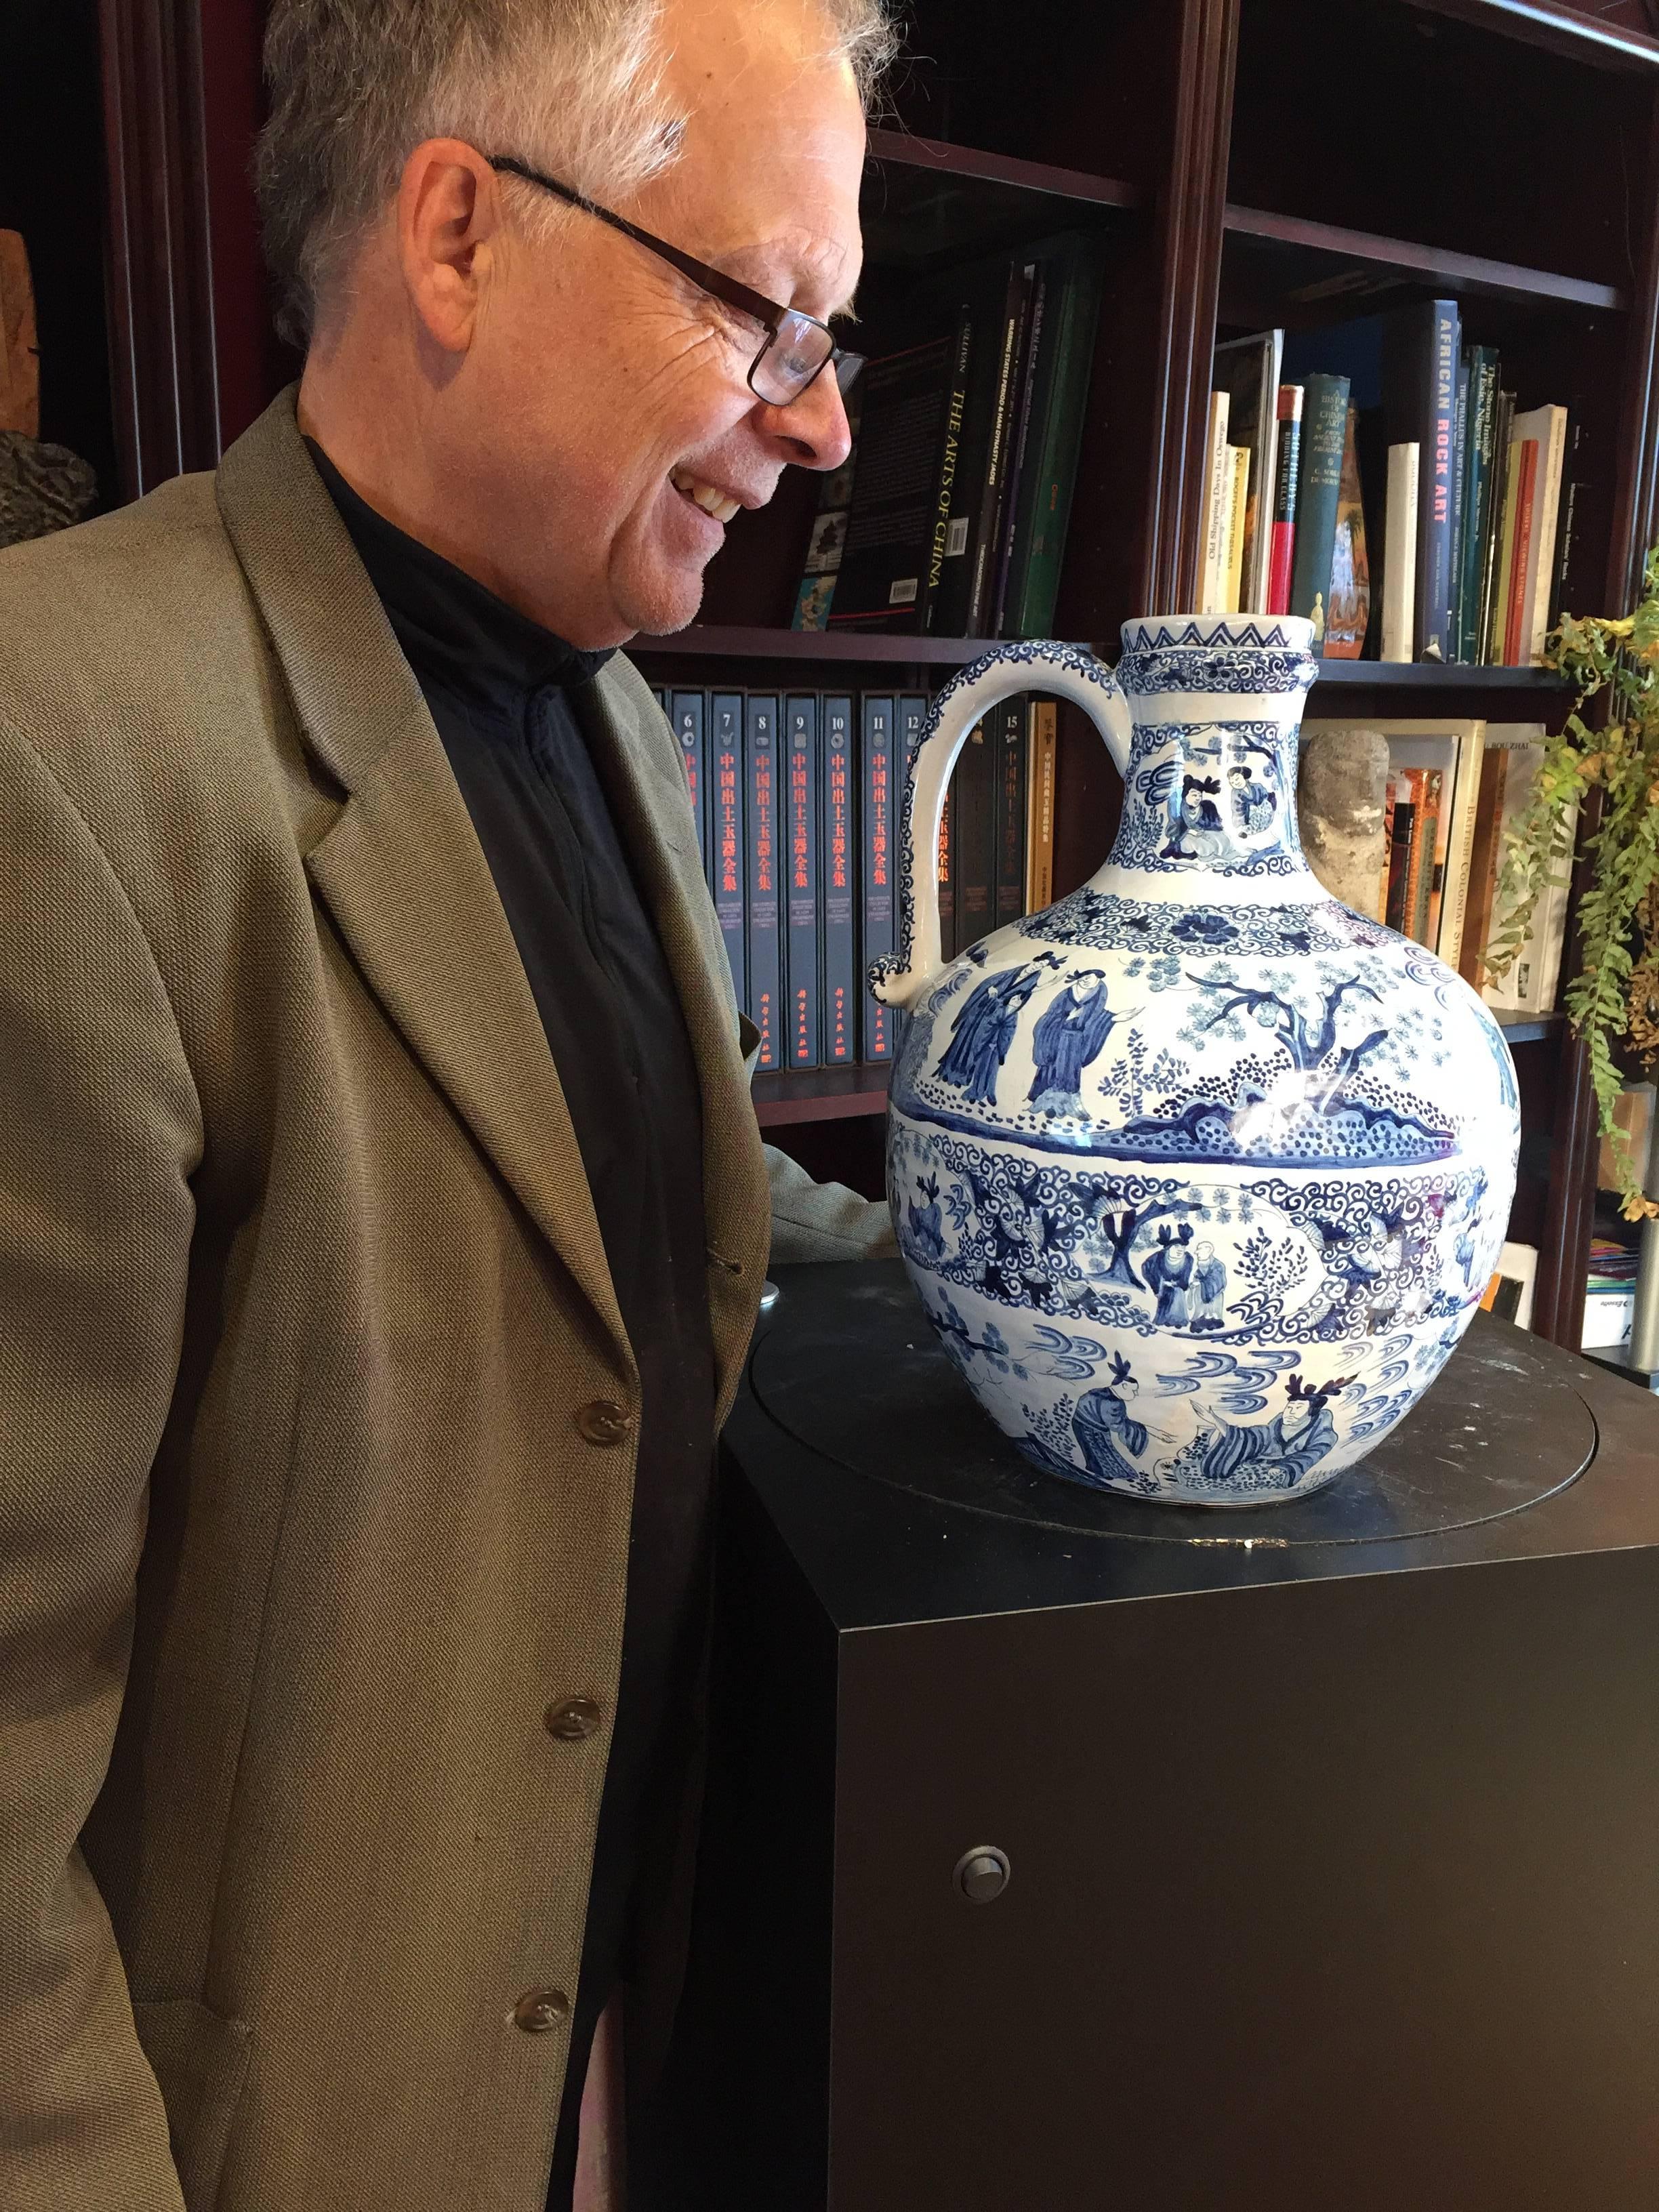 SALE - NOW SAVE 25% AND MORE

A superb hand made and hand painted Delft House 19th century  Chinoiserie  Chinese garden blue and white bottle vase featuring beautiful panels of Chinese figures, garden scenes, flowers, and scroll work including the